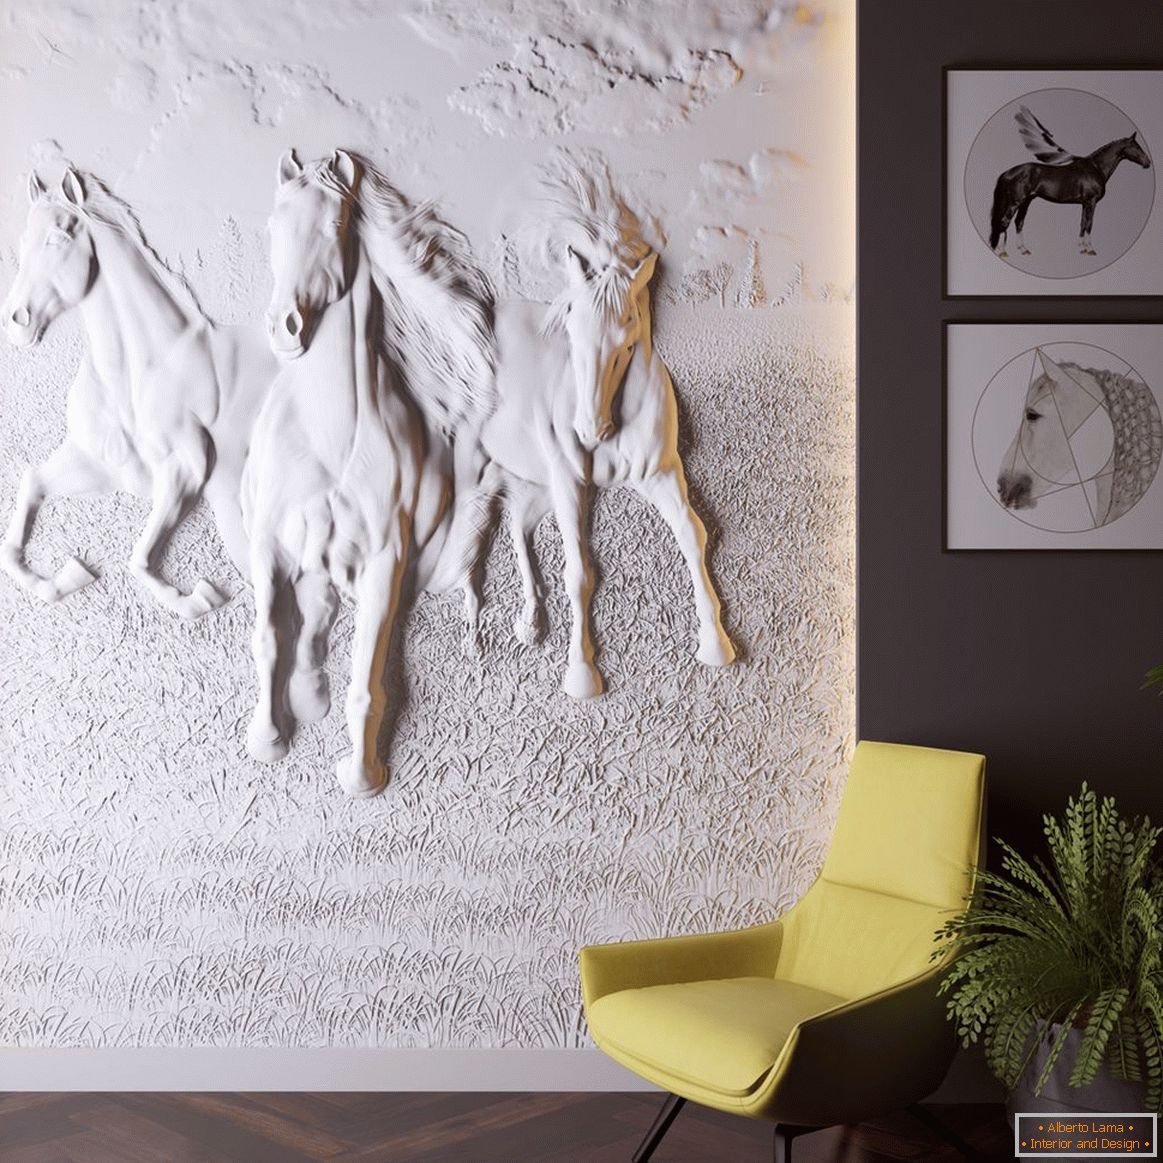 Bas-relief of three horses